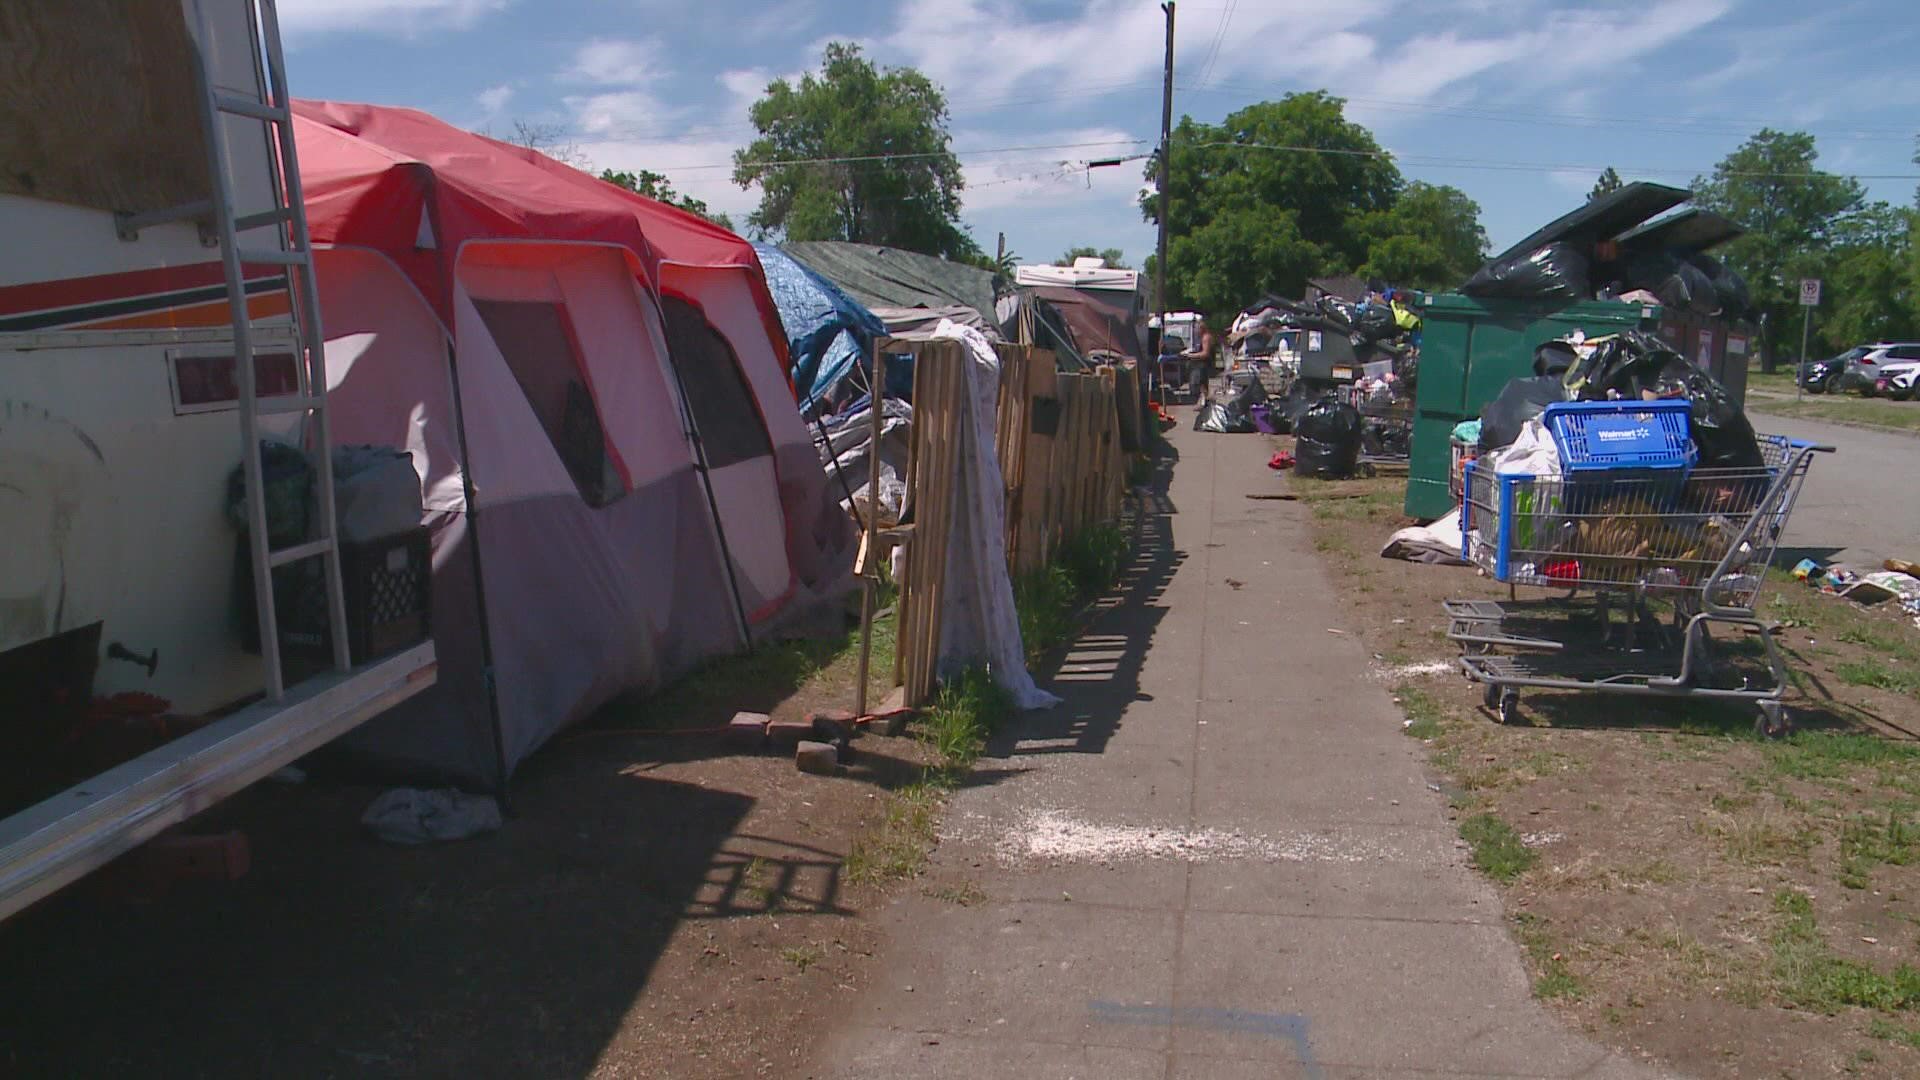 Over the last year, the homeless camp near I-90 and Freya grew to more than 600 people.